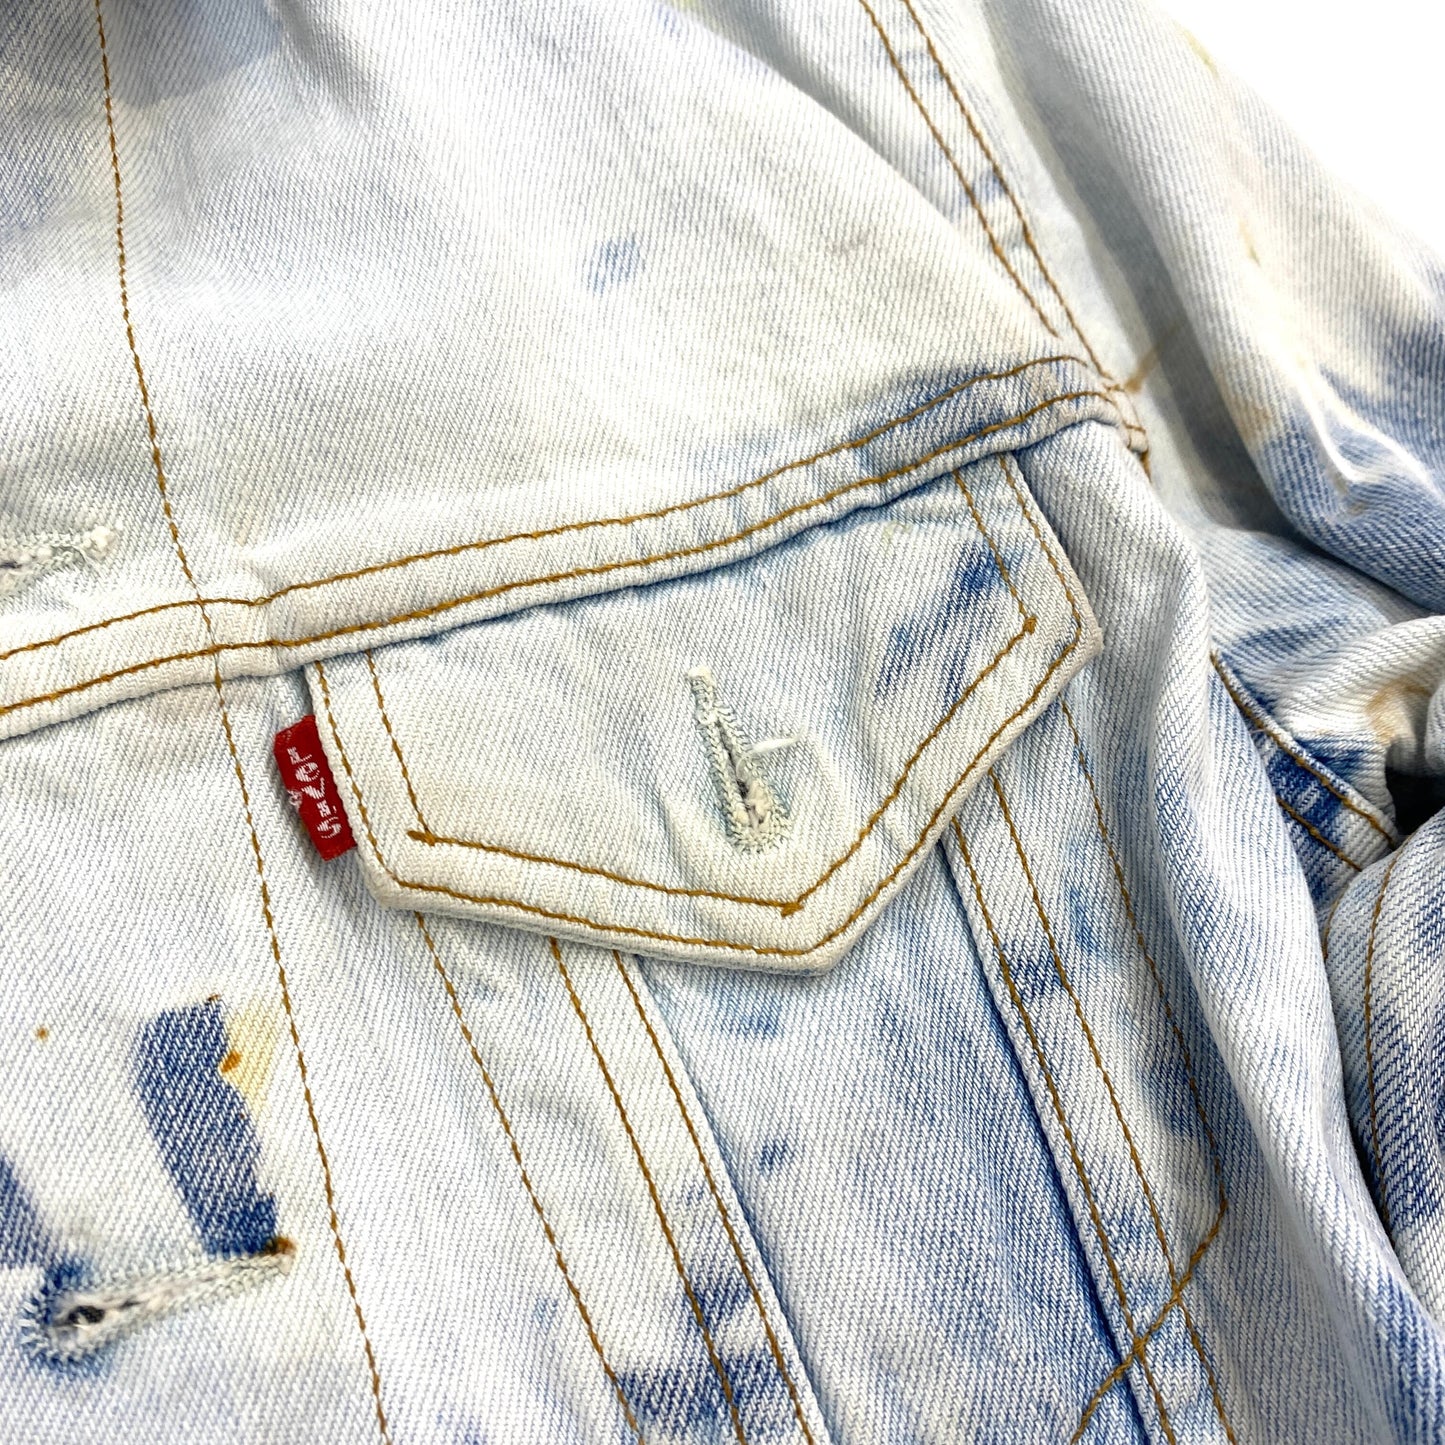 Wagara Remake Bespoke Japanese Japan Vintage Levi's Handmade Custom One and Only One Cote Mer Upcycle Sustainable Street Fashion Embroidered Embroidery Kimono Obi Boro Patchwork x Bleached Denim Jacket ( Size : S )